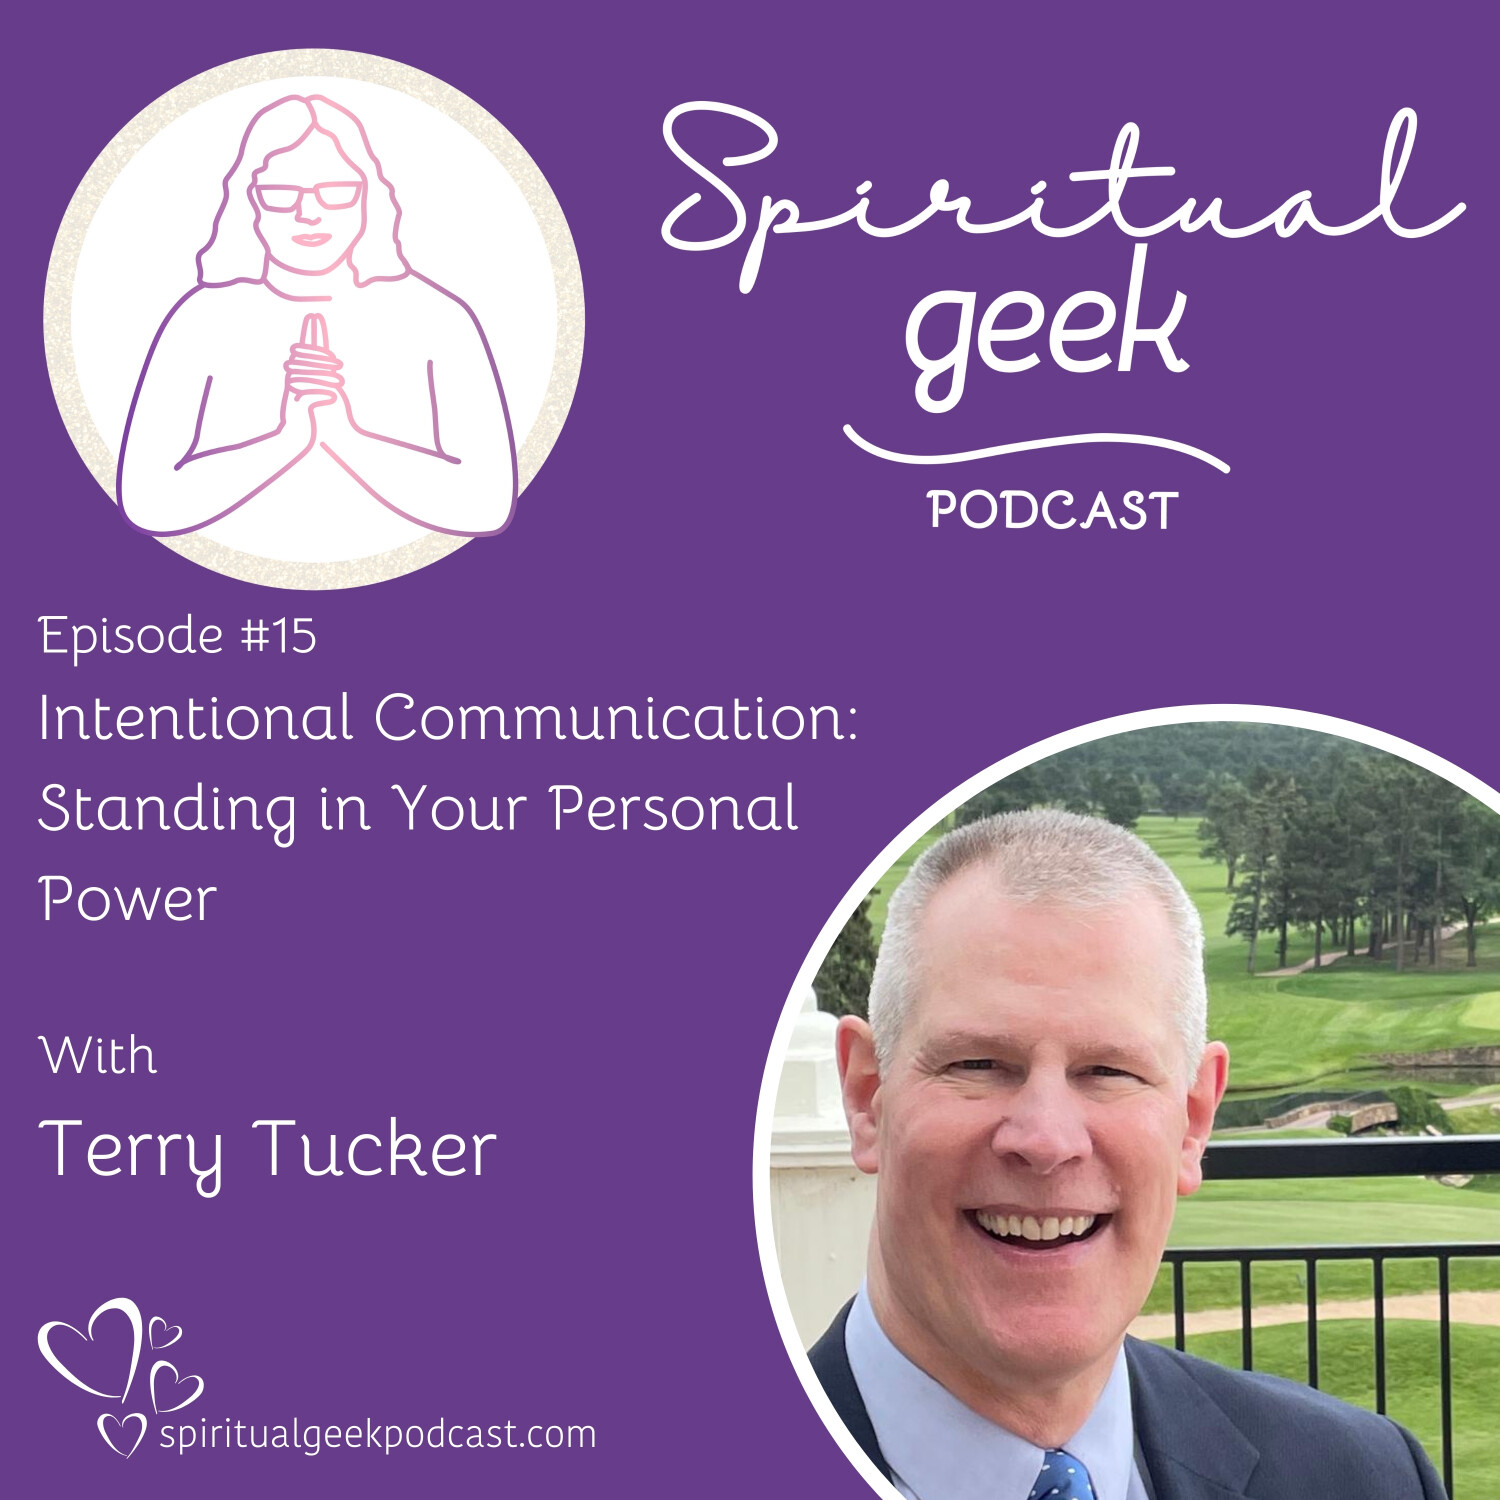 Intentional Communication: Standing in Your Personal Power with Terry Tucker